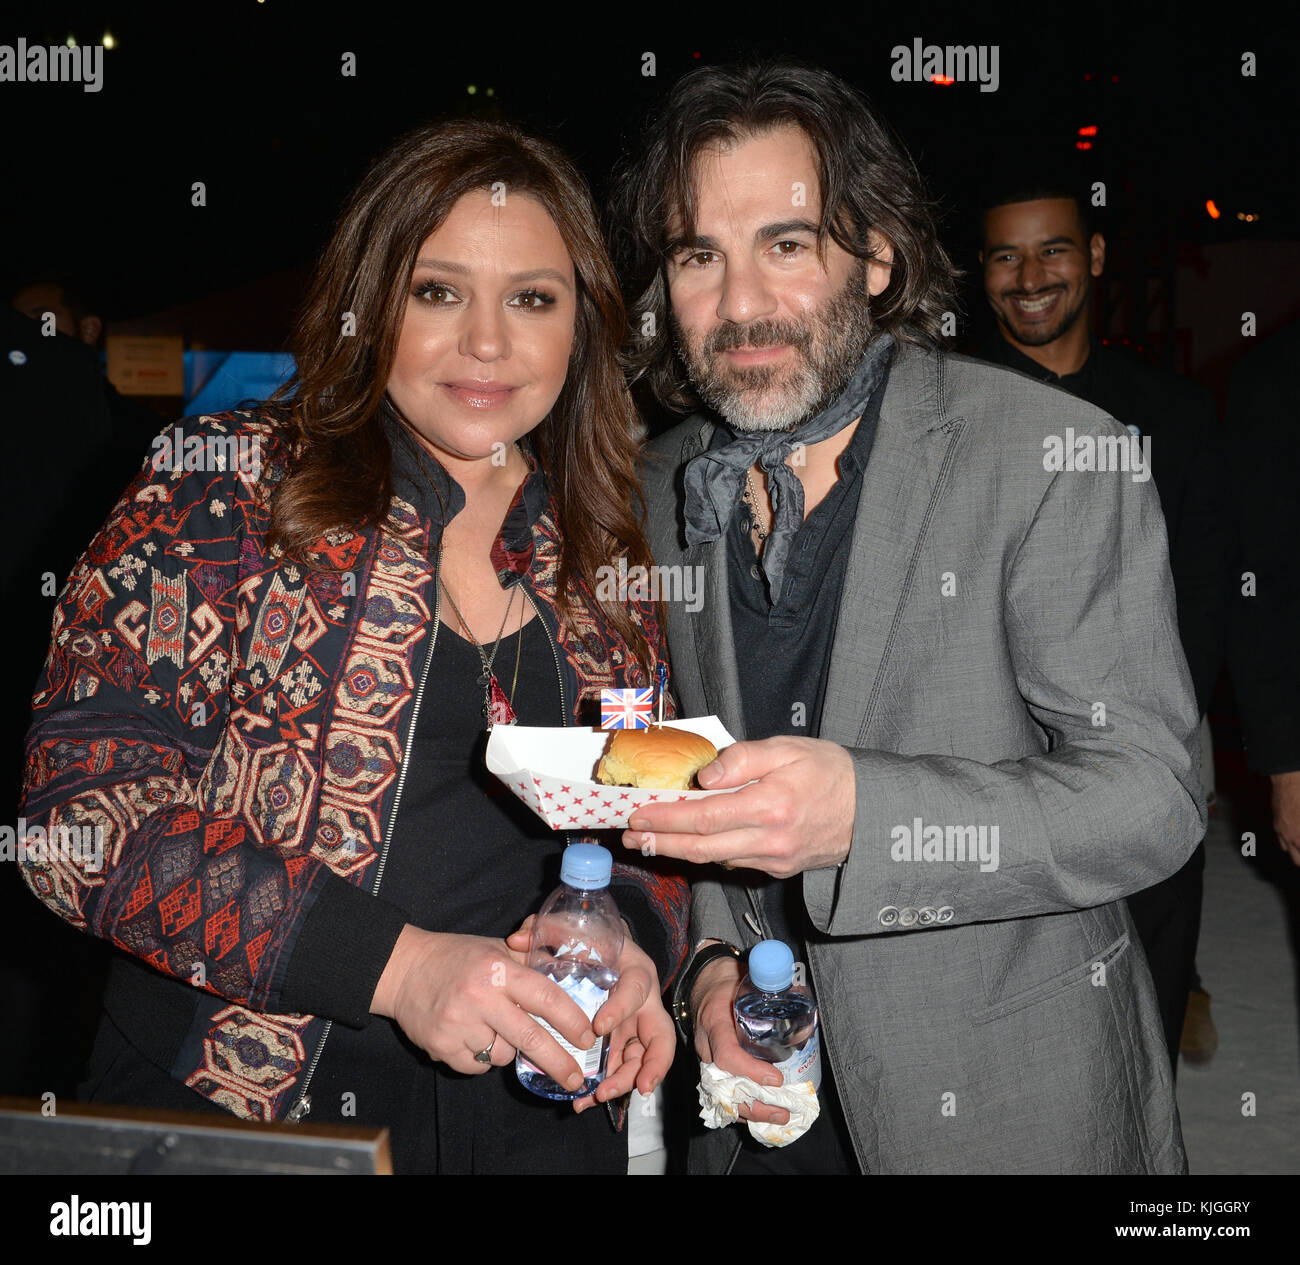 MIAMI BEACH, FL - FEBRUARY 26: Celebrity cook and author Rachael Ray with her husband John M. Cusimano attend Burger Bash at the 2016 Food Network & Cooking Channel South Beach Wine & Food Festival Beachside at The Ritz Carlton on February 26, 2016 in Miami Beach, Florida  People:  Rachael Ray, John Cusimano Stock Photo